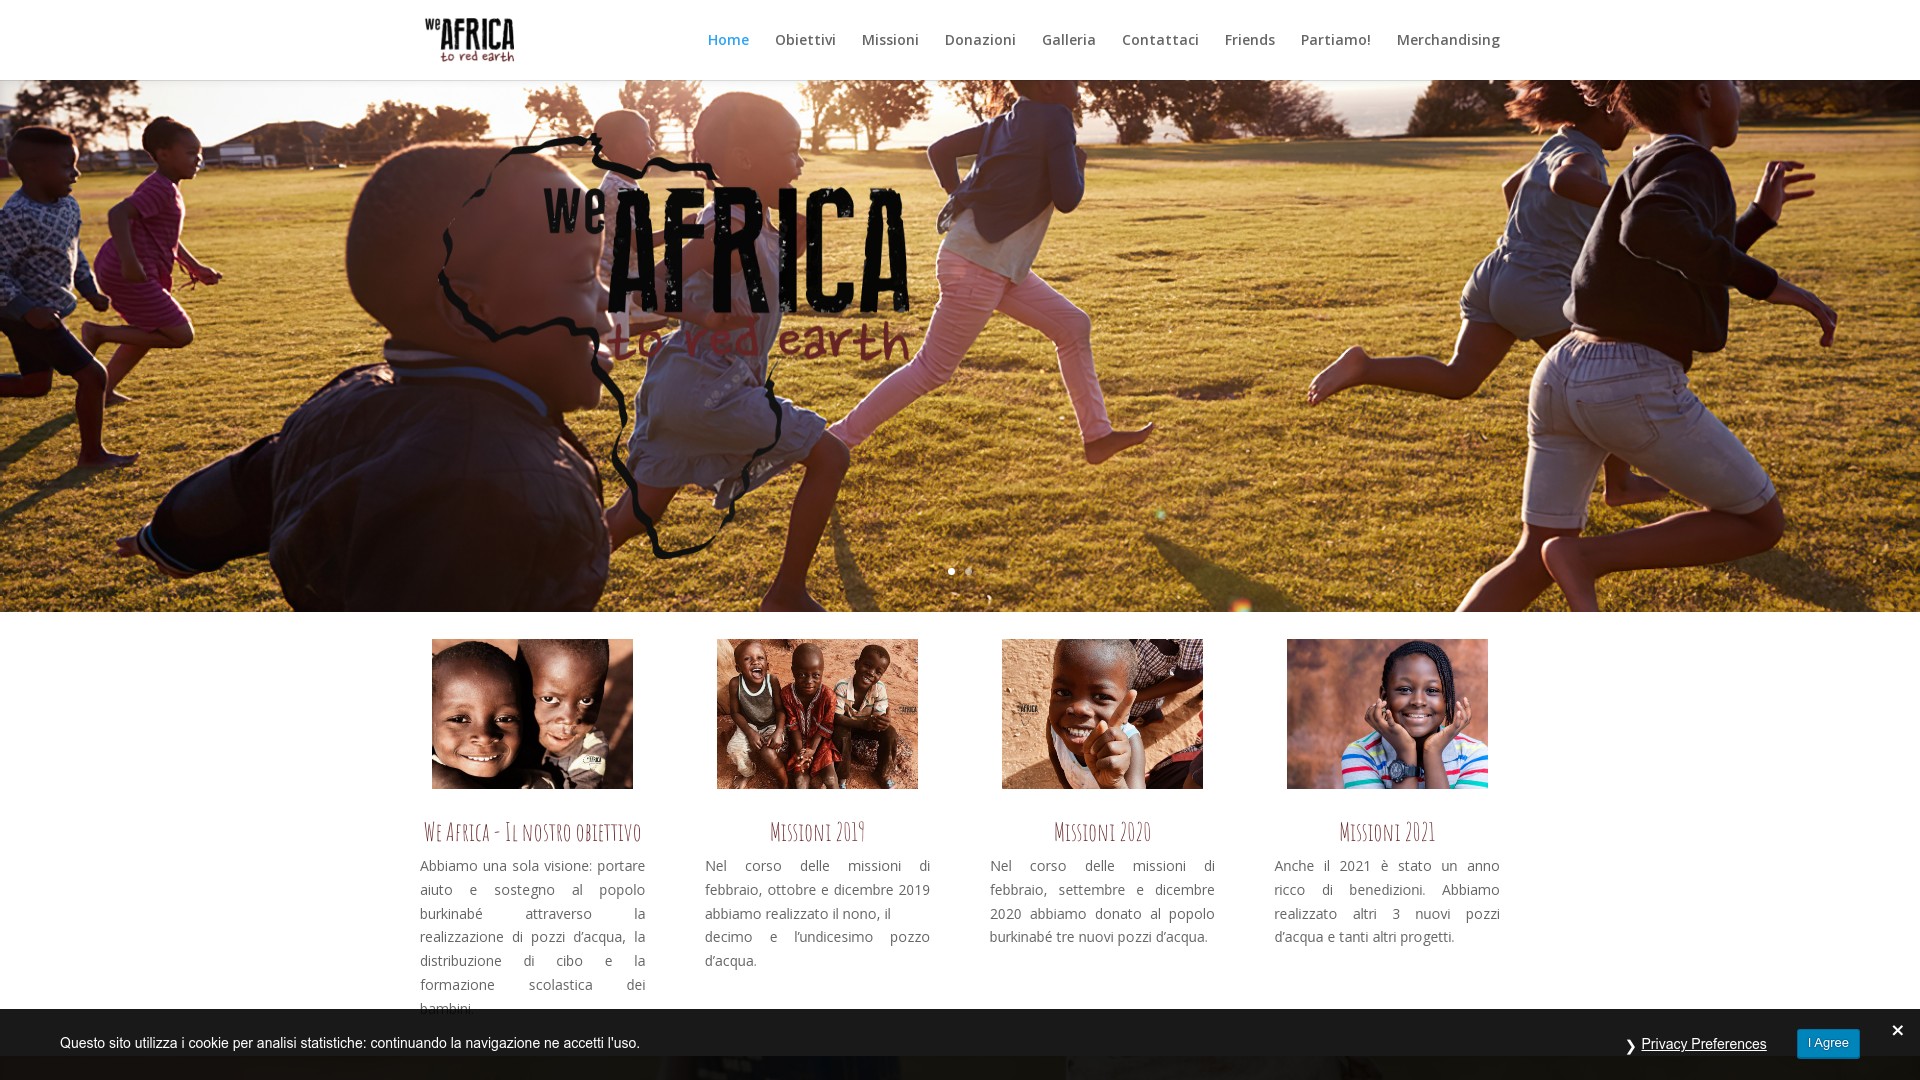 WeAfrica